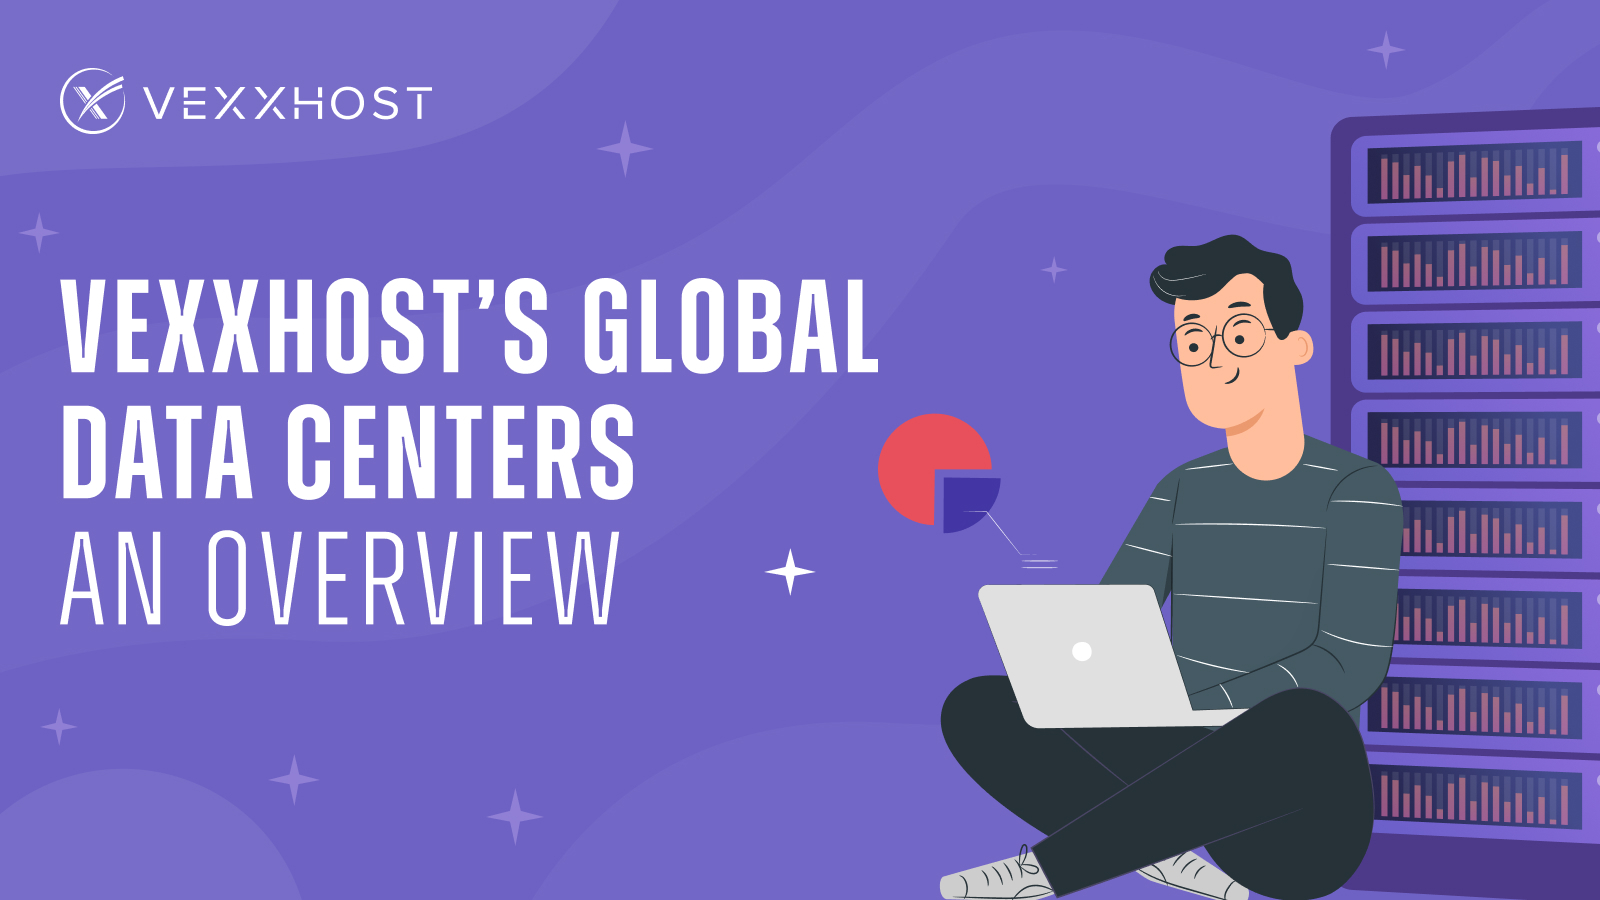 VEXXHOST’s Global Data Centers - An Overview